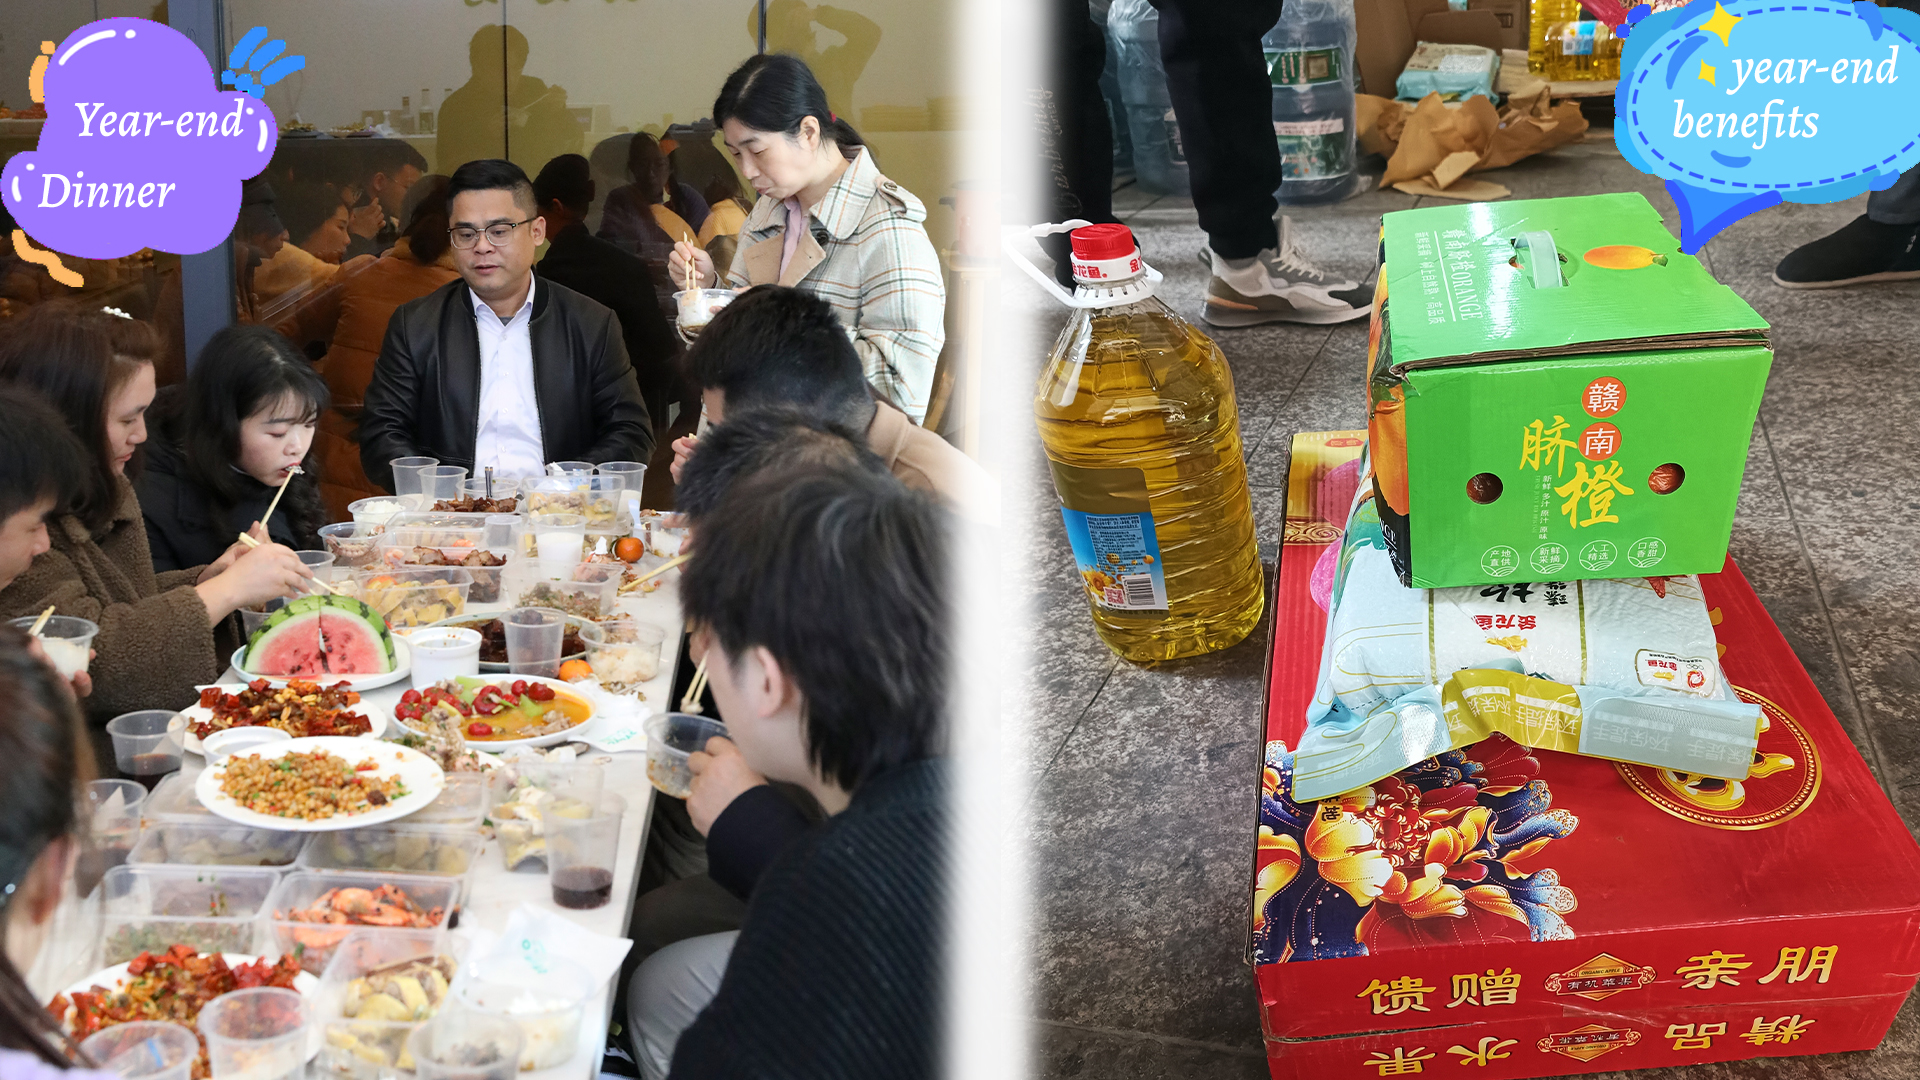 2022.1.20 We all have a simple year-end dinner together and give out New Year's goods benefits | PAIDU